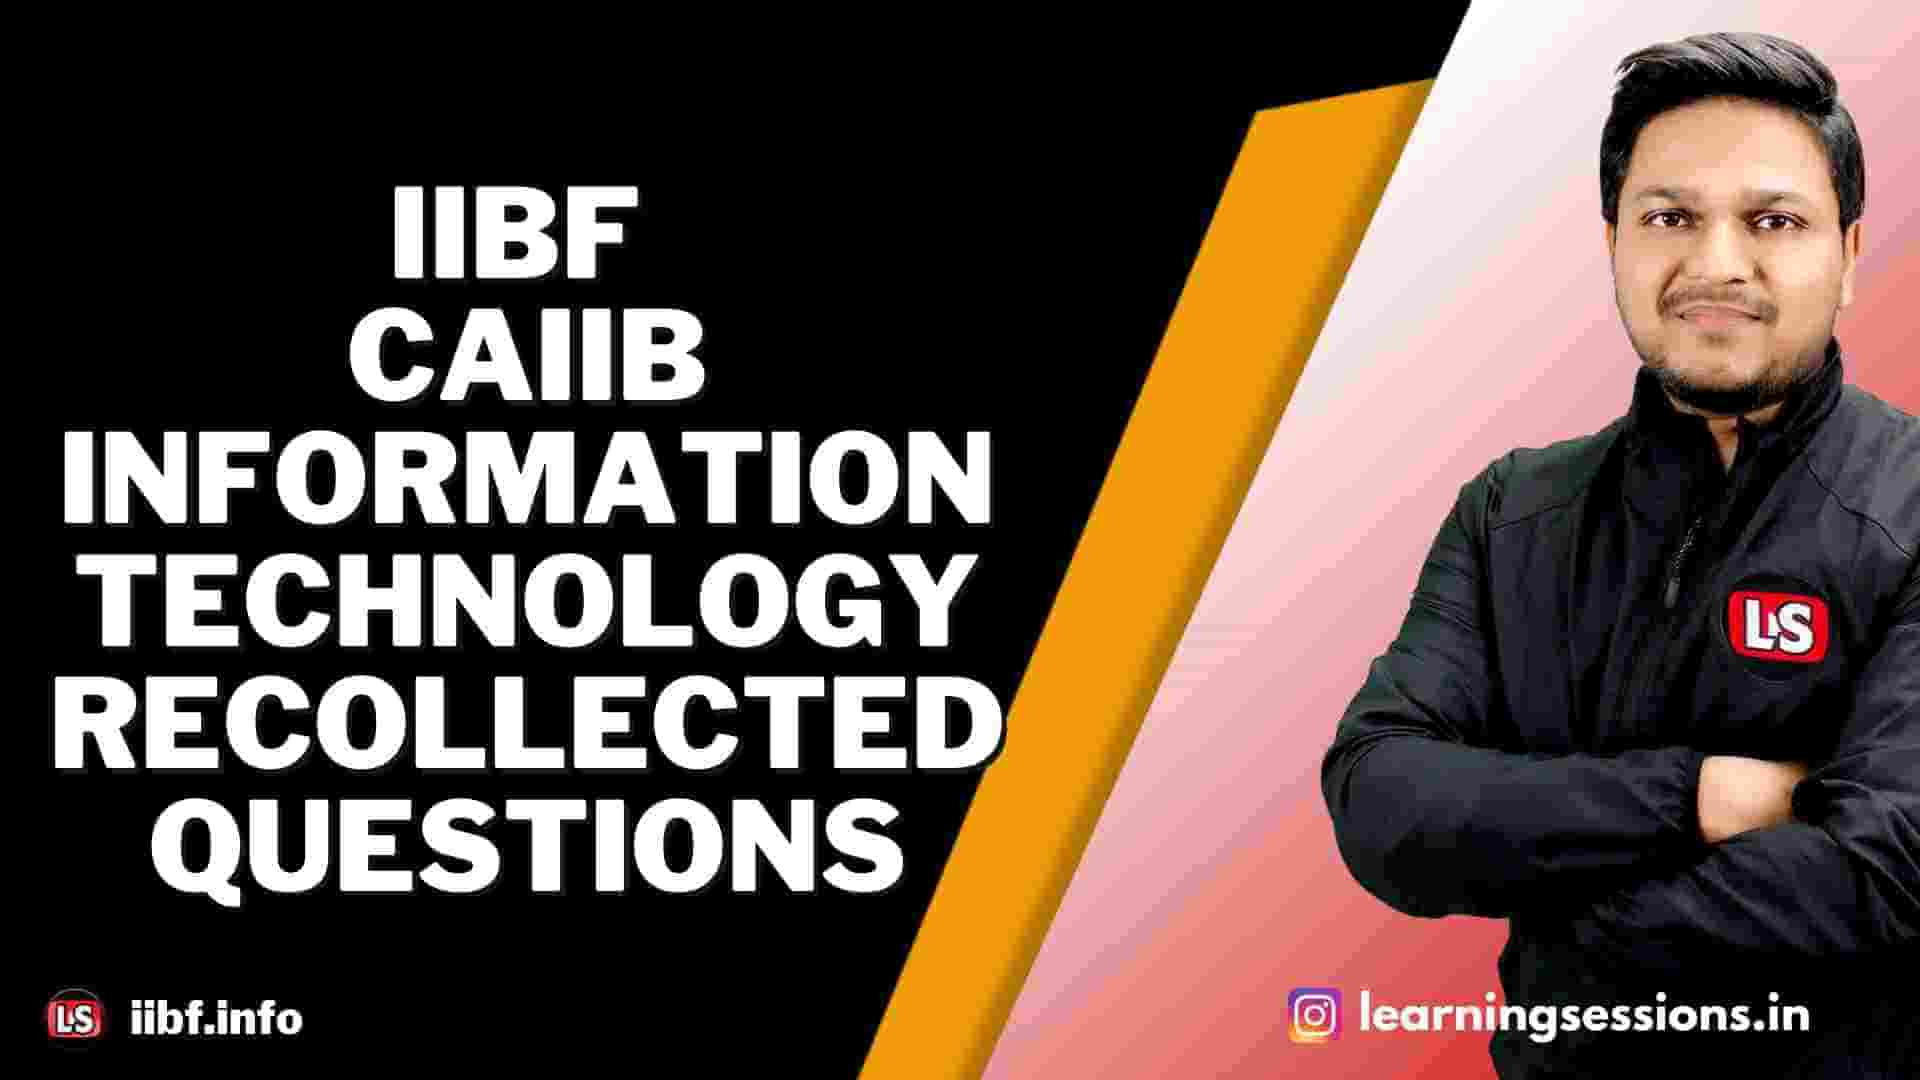 IIBF CAIIB INFORMATION TECHNOLOGY RECOLLECTED QUESTIONS